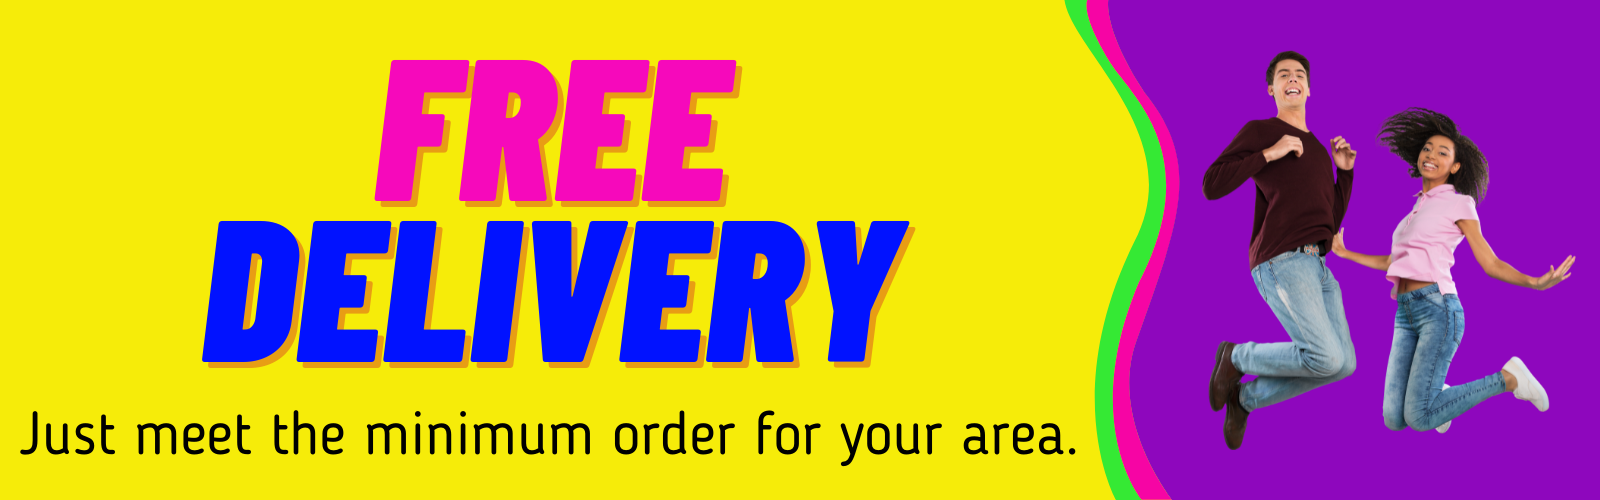 Free Delivery for Cameron NC bounce house rentals with qualifying order